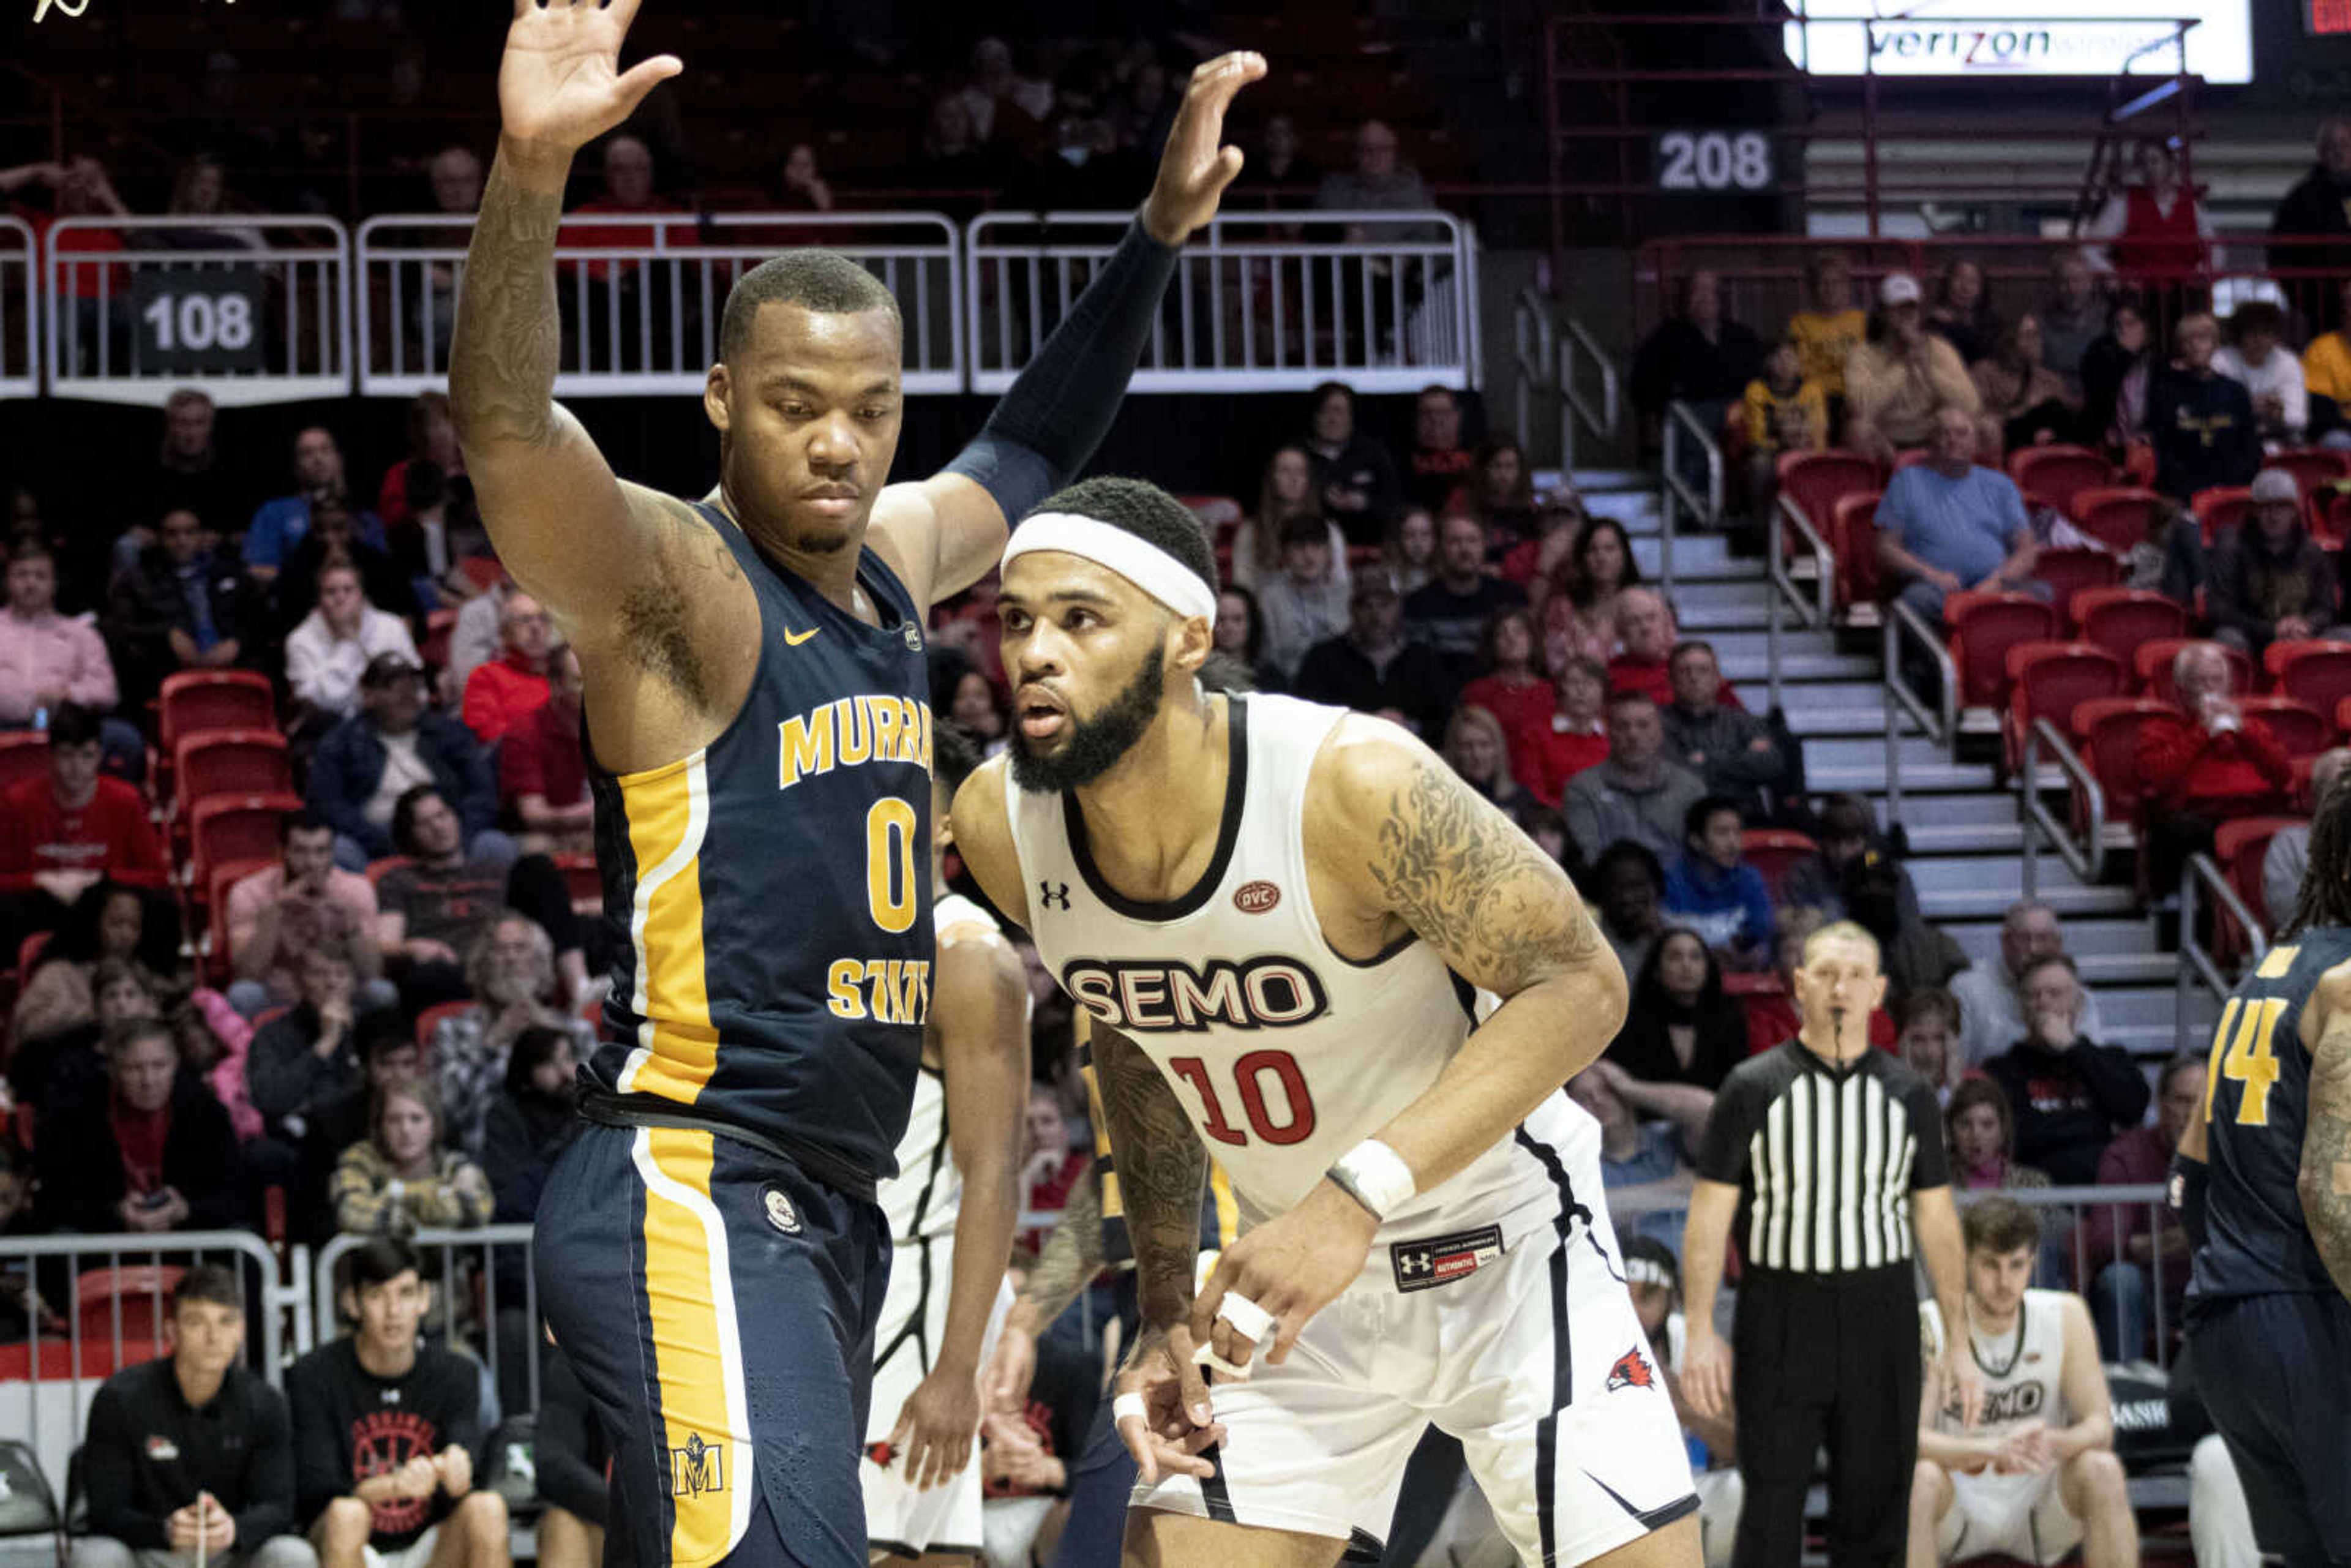 Senior forward Manny Patterson tries to get open during Southeast’s 70-68 loss to #19 Murray State on Feb. 26 at the Show Me Center in Cape Girardeau.